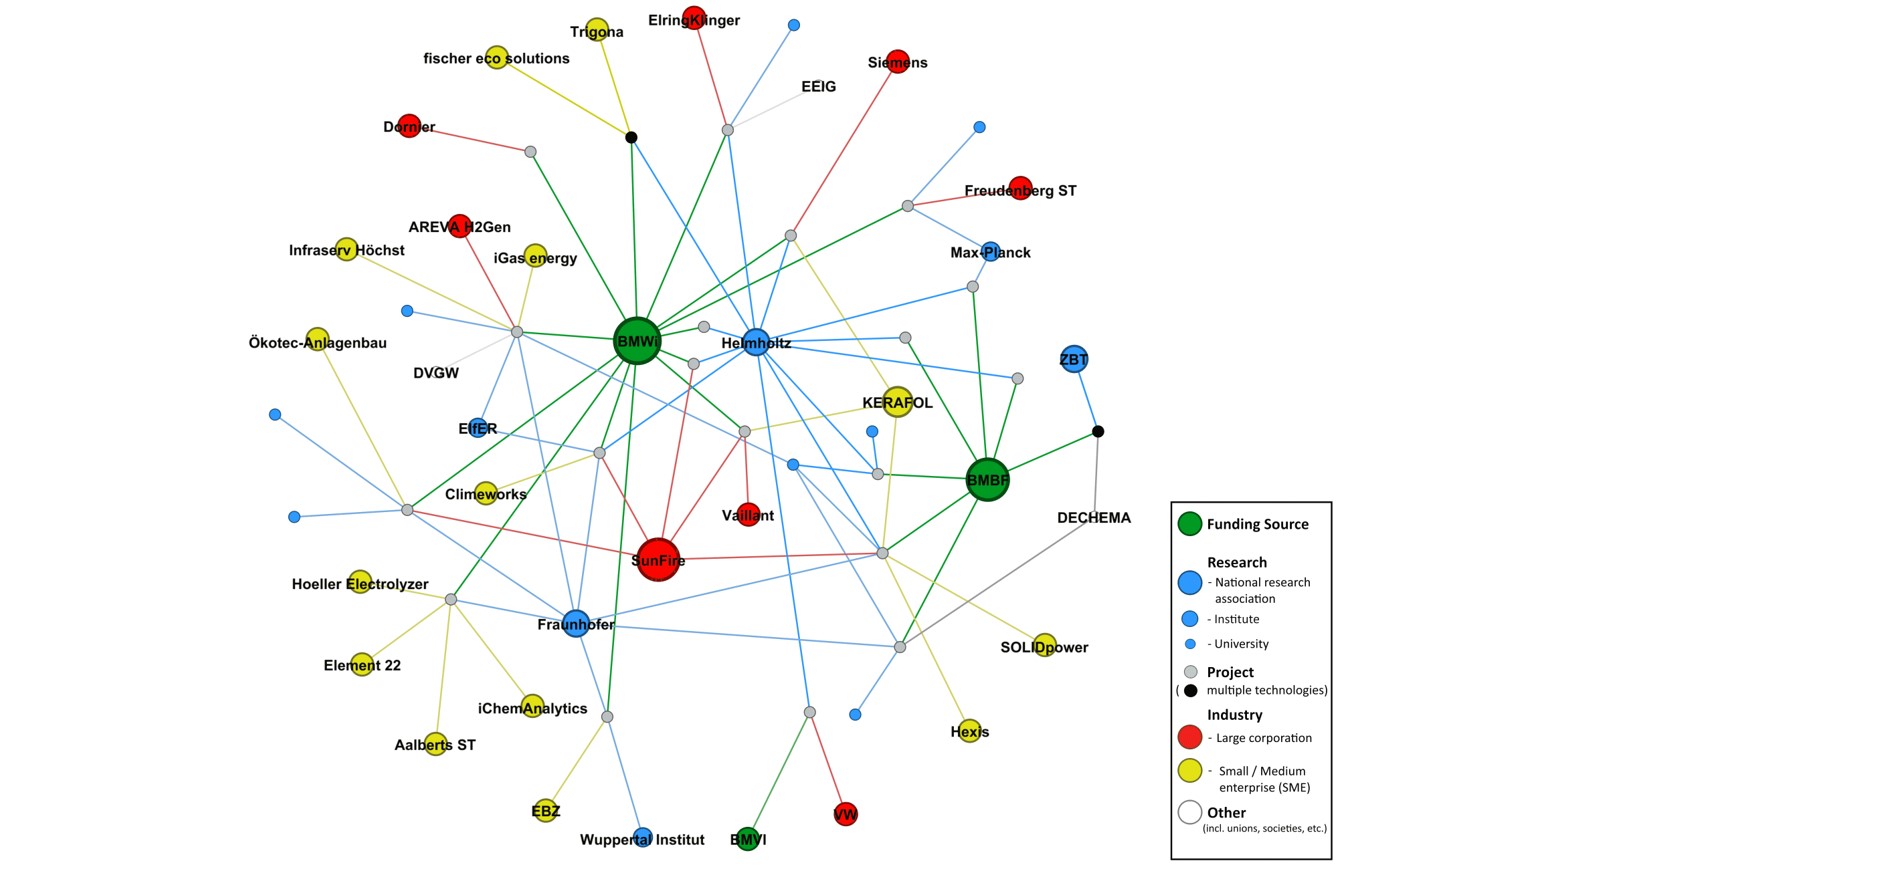 Figure 3: Network graph for public funding of projects related to high-temperature electrolysis in Germany.